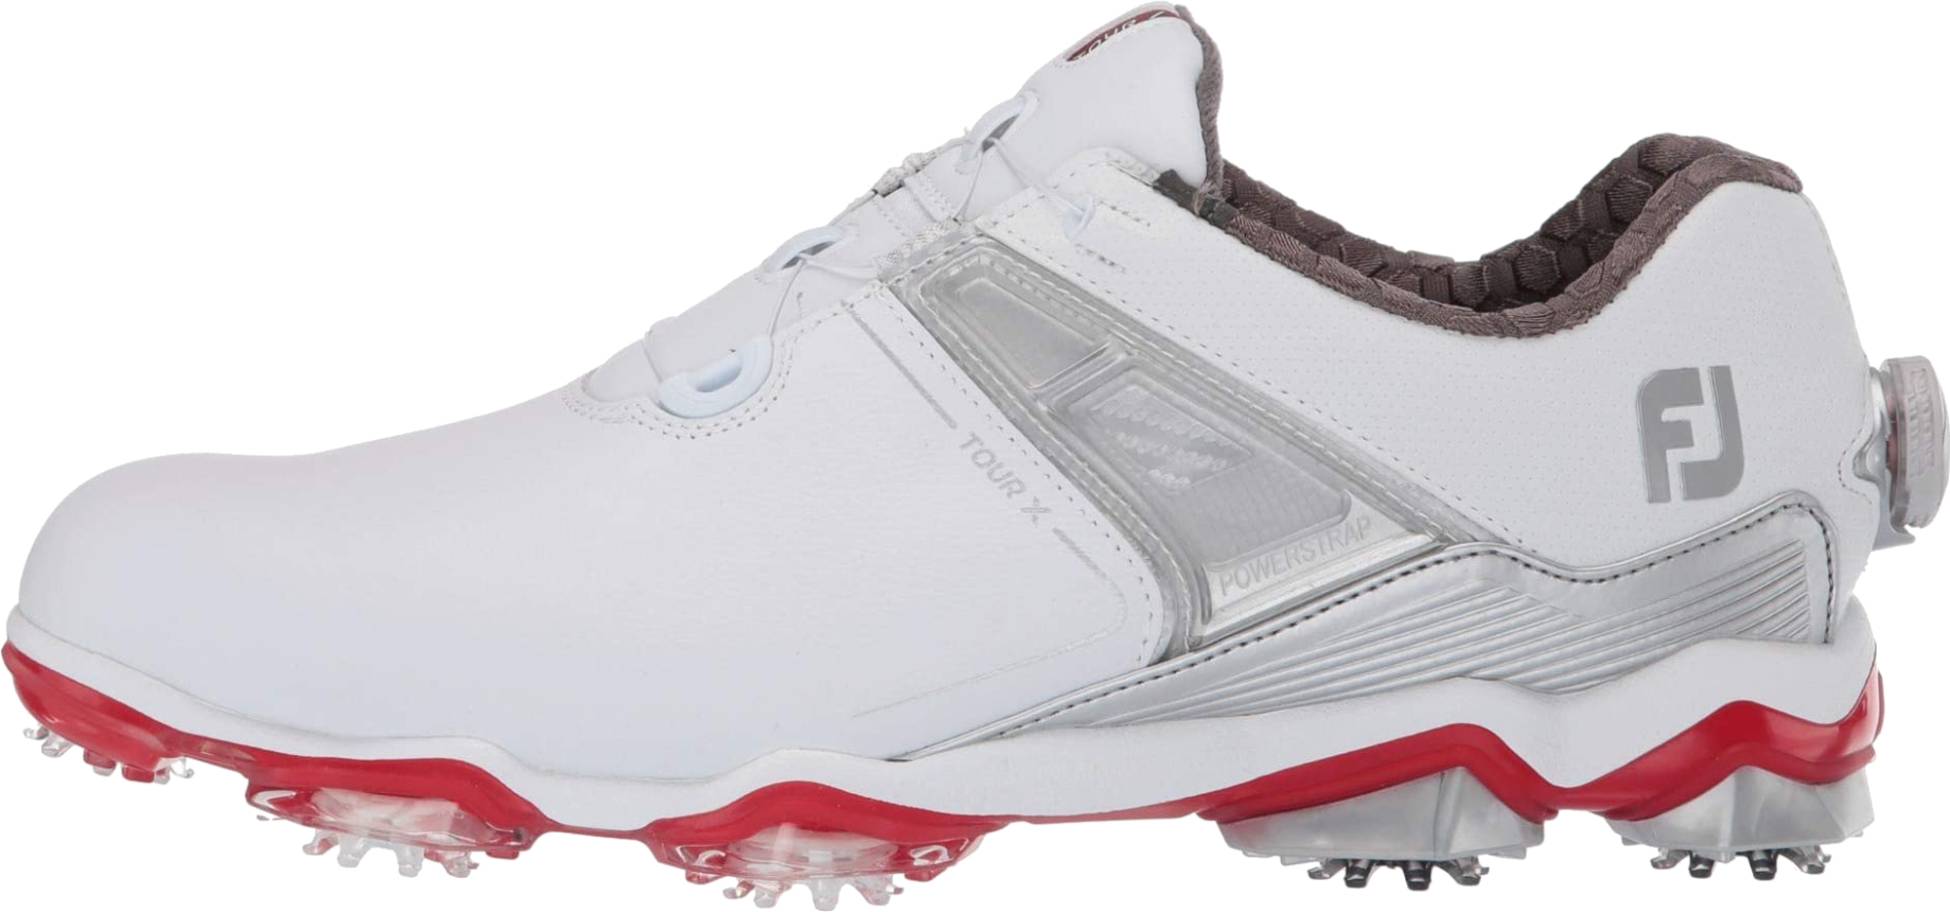 Save 37% on Boa Golf Shoes (12 Models 